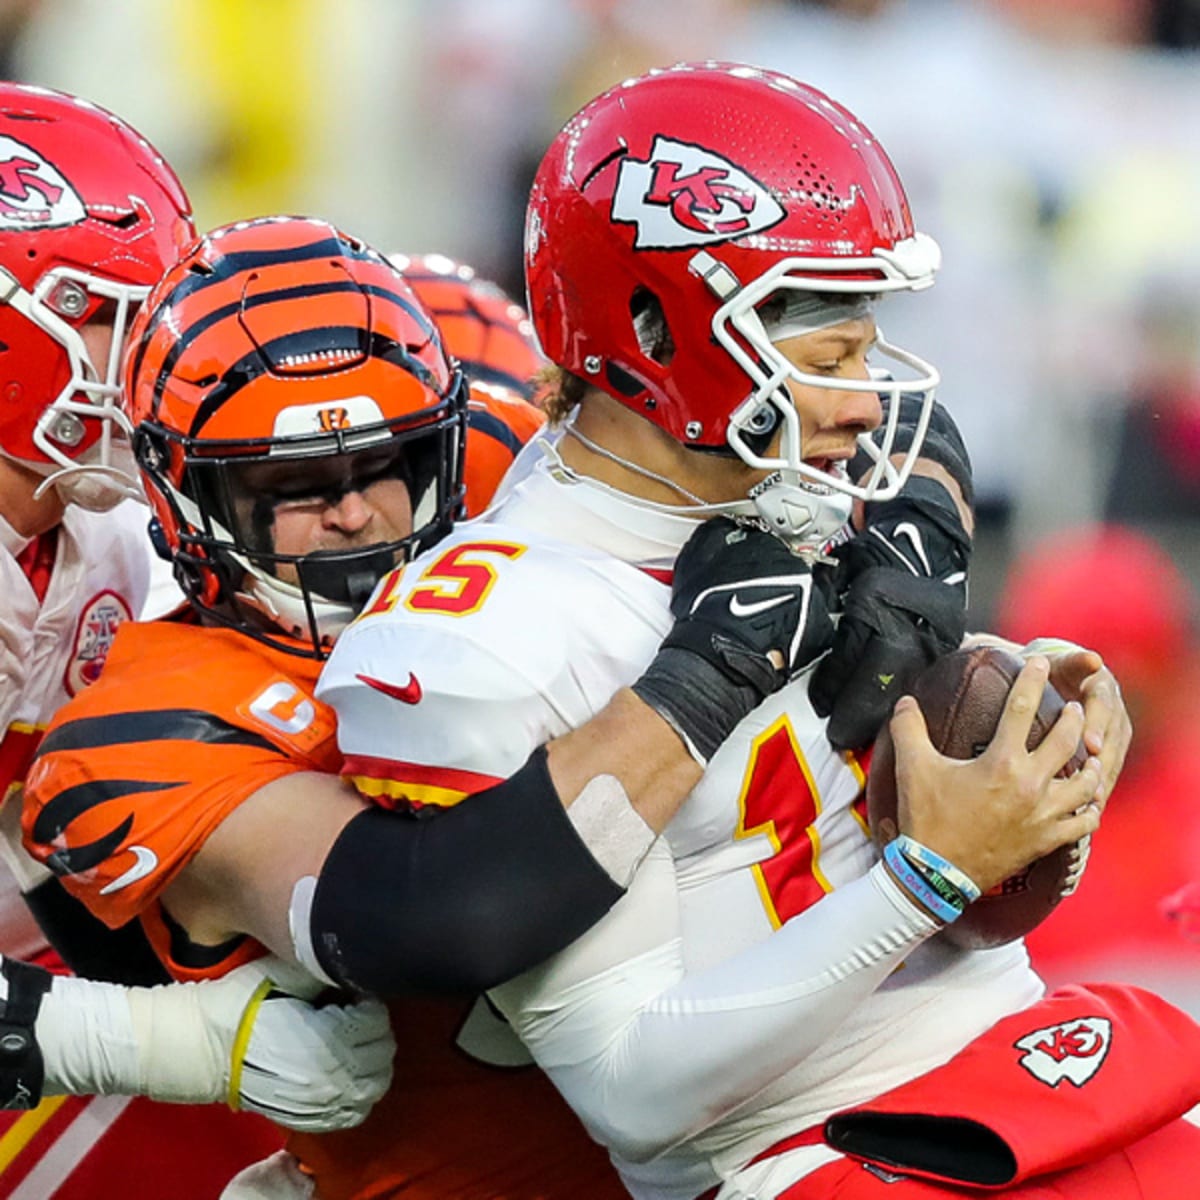 Bengals vs. Chiefs: Predictions and preview for the AFC title game